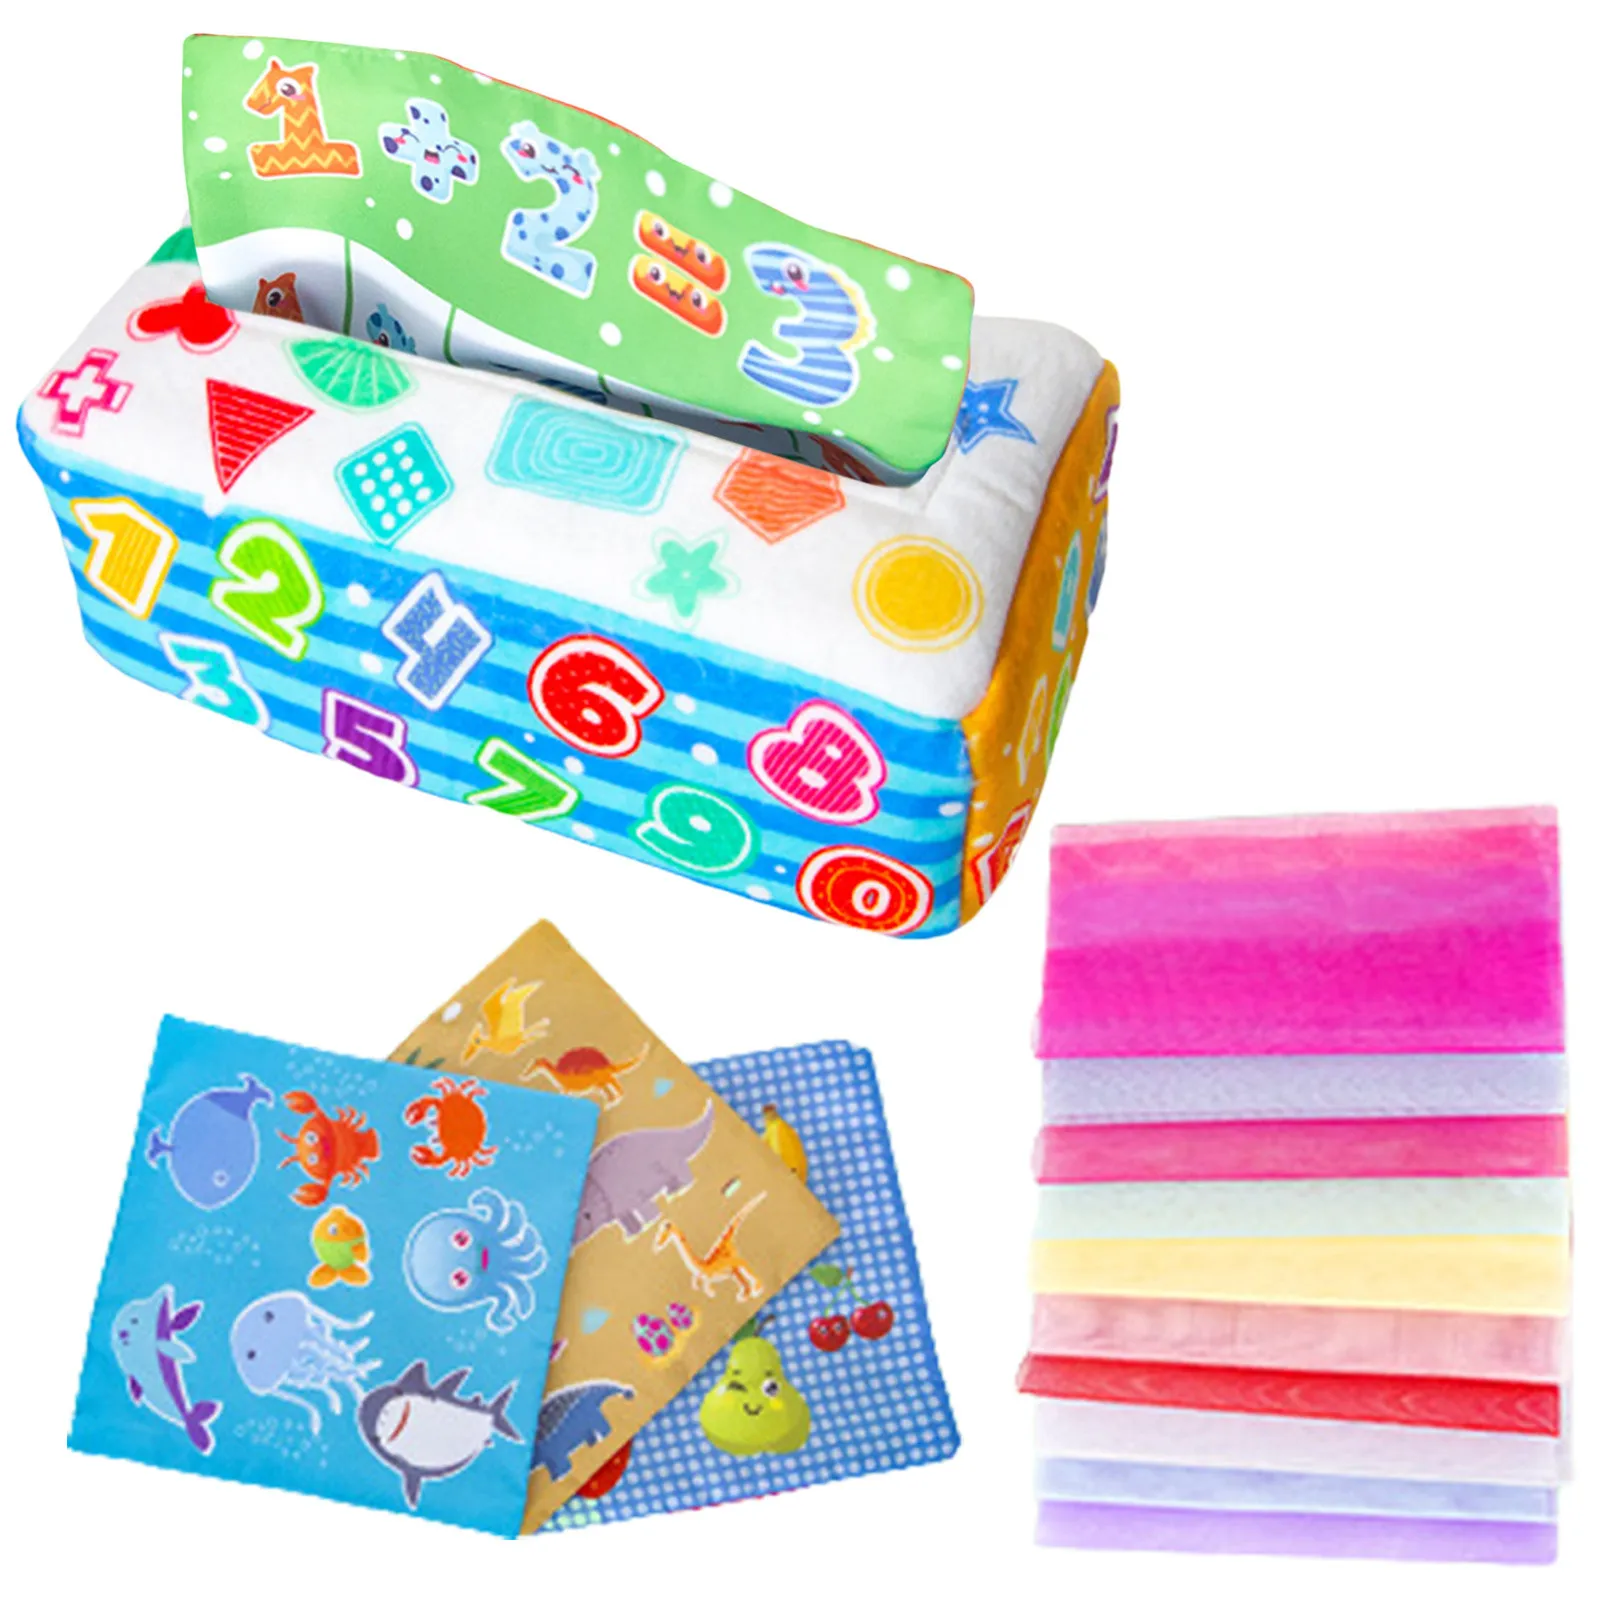 

Babies Tissue Box Toy Montessori Educational Toys Colorful Soft Sensory Toy For Toddler Finger Exercise Pumping Silk Scarf Gift